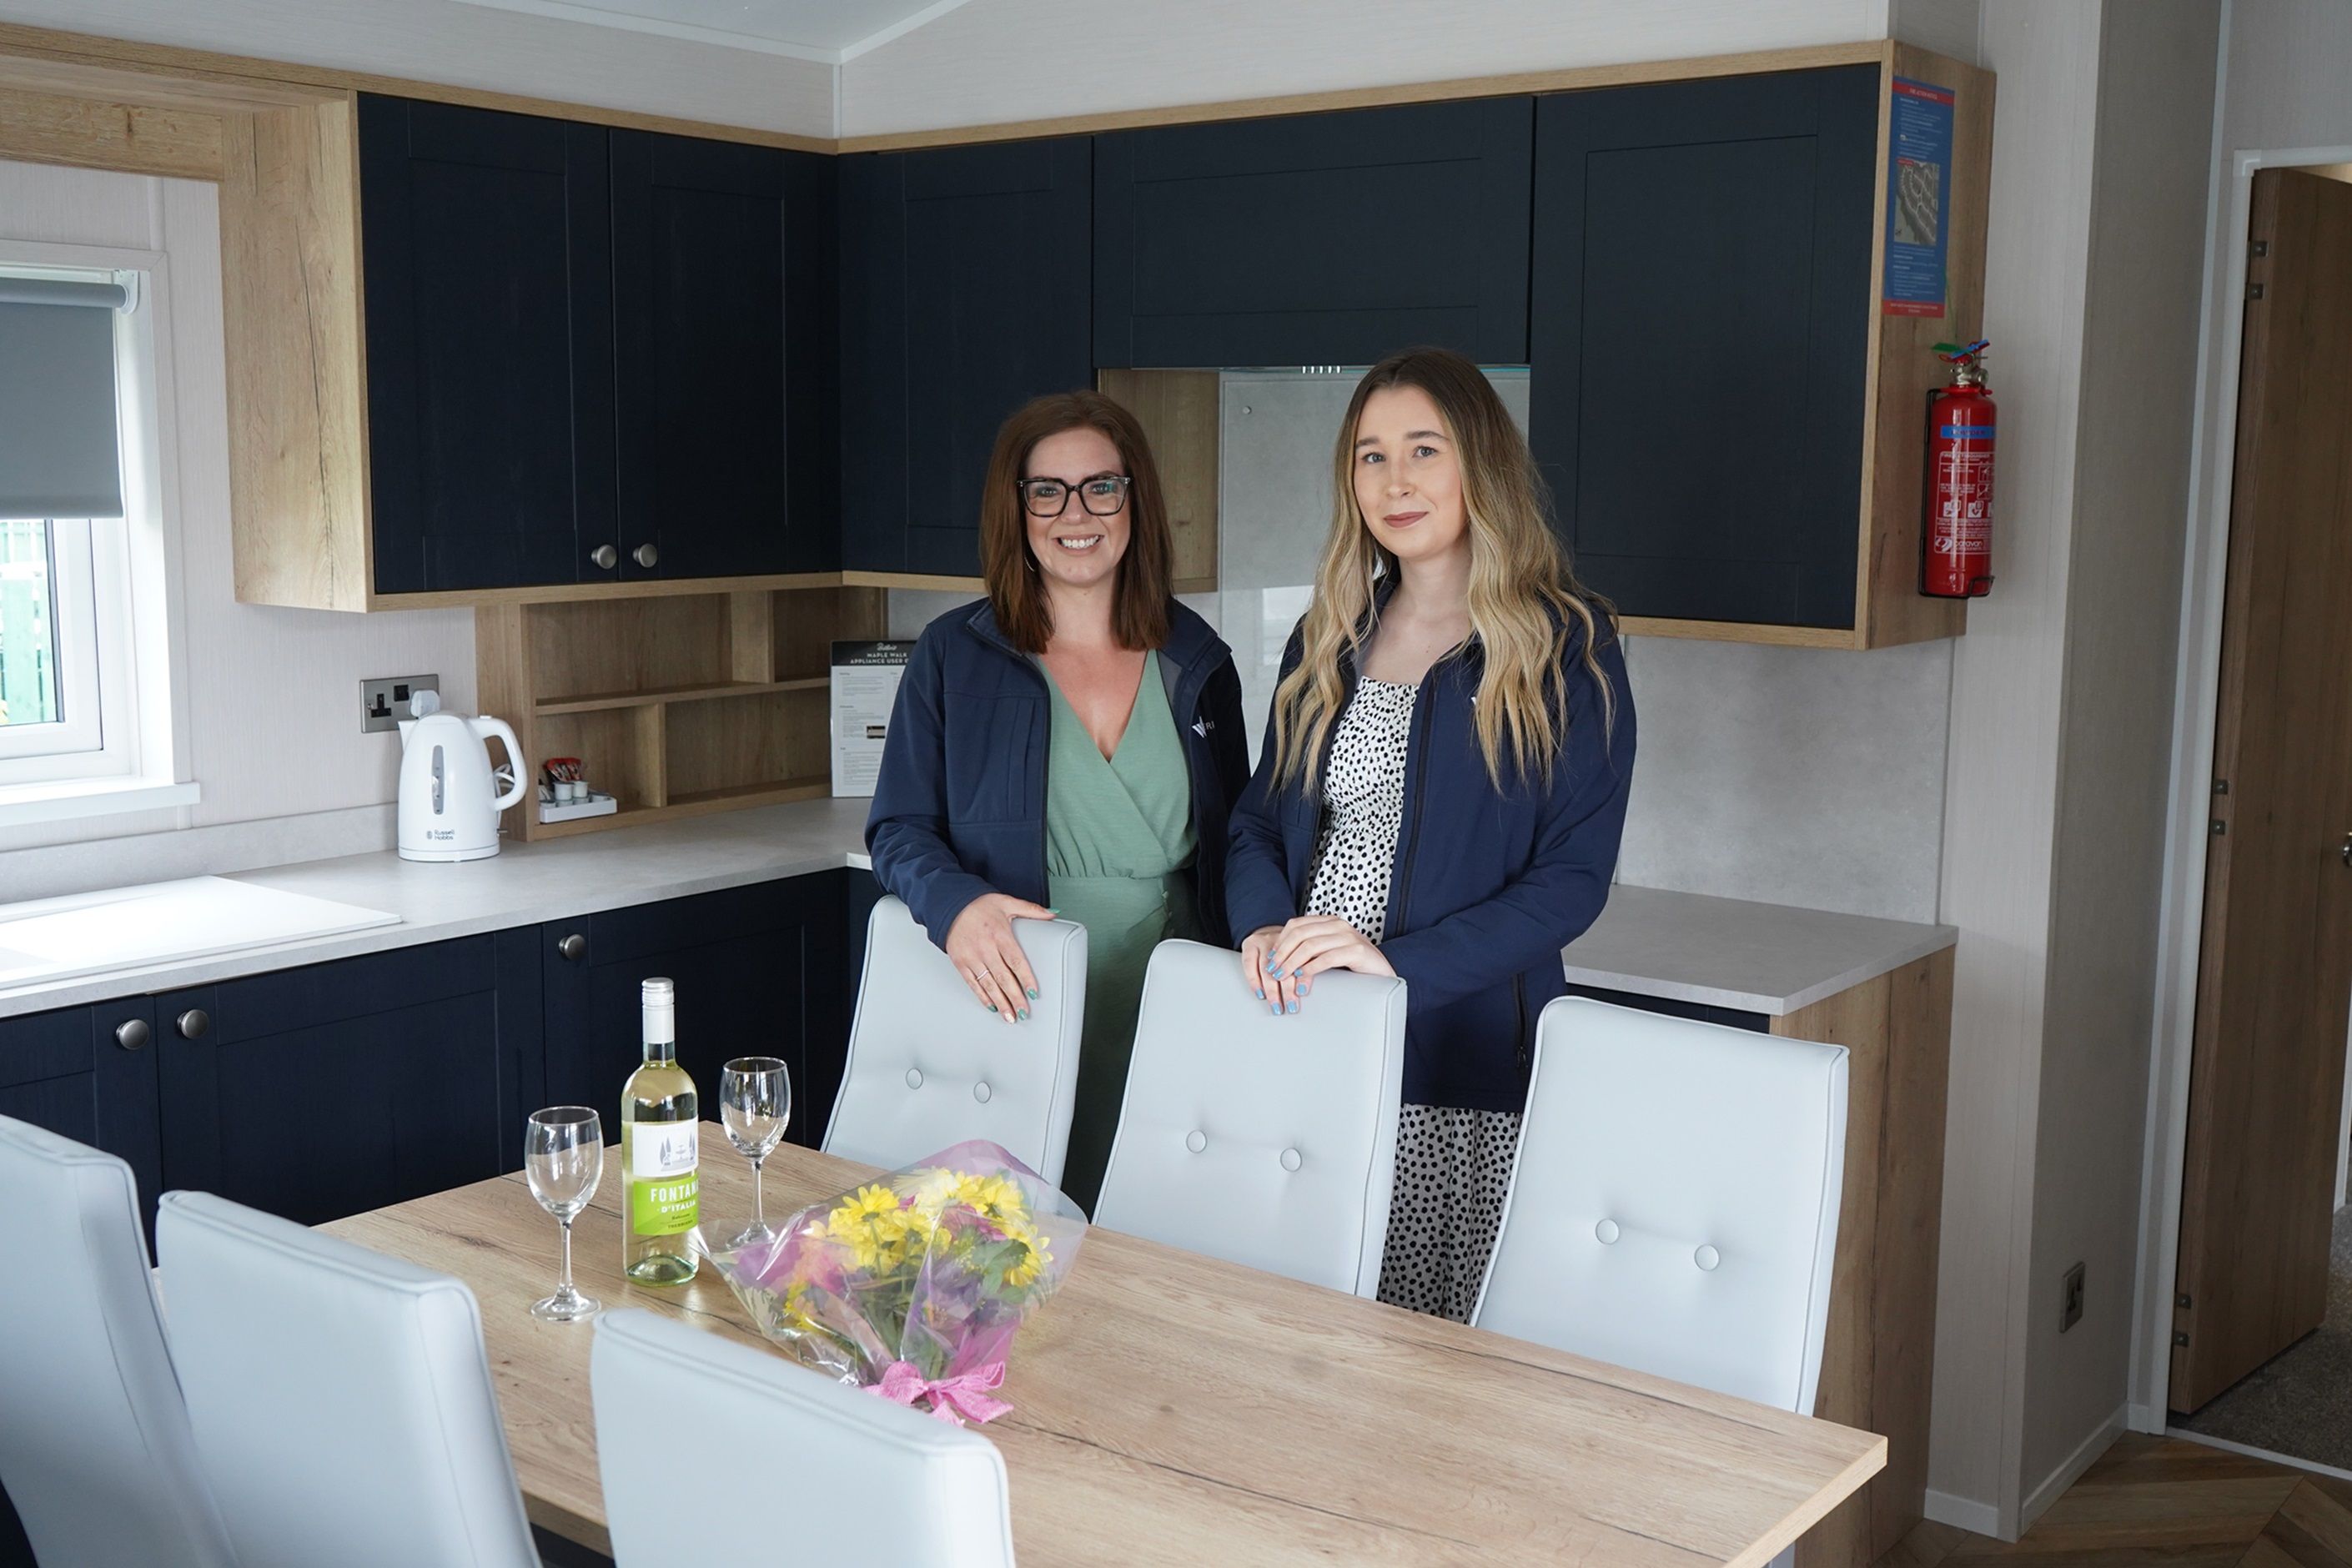 Gemma Pudsey, Willerby’s Business Development Manager, left, and the company’s Junior Product Manager Emillie Ayre in one of the 128 luxury lodges at Maple Walk.